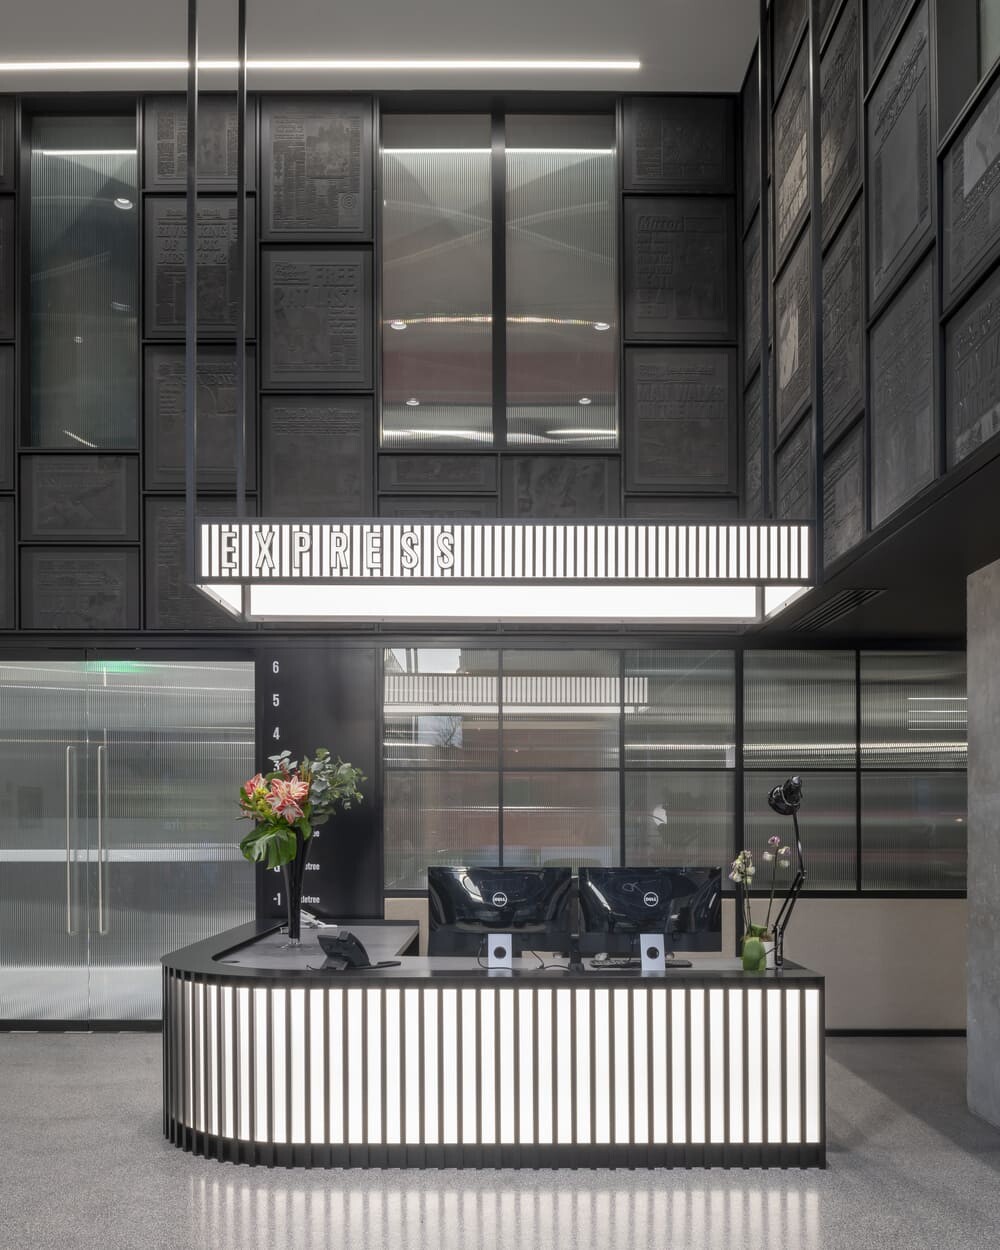 Express Building Manchester, Contemporary Refurbishment by Ben Adams Architects